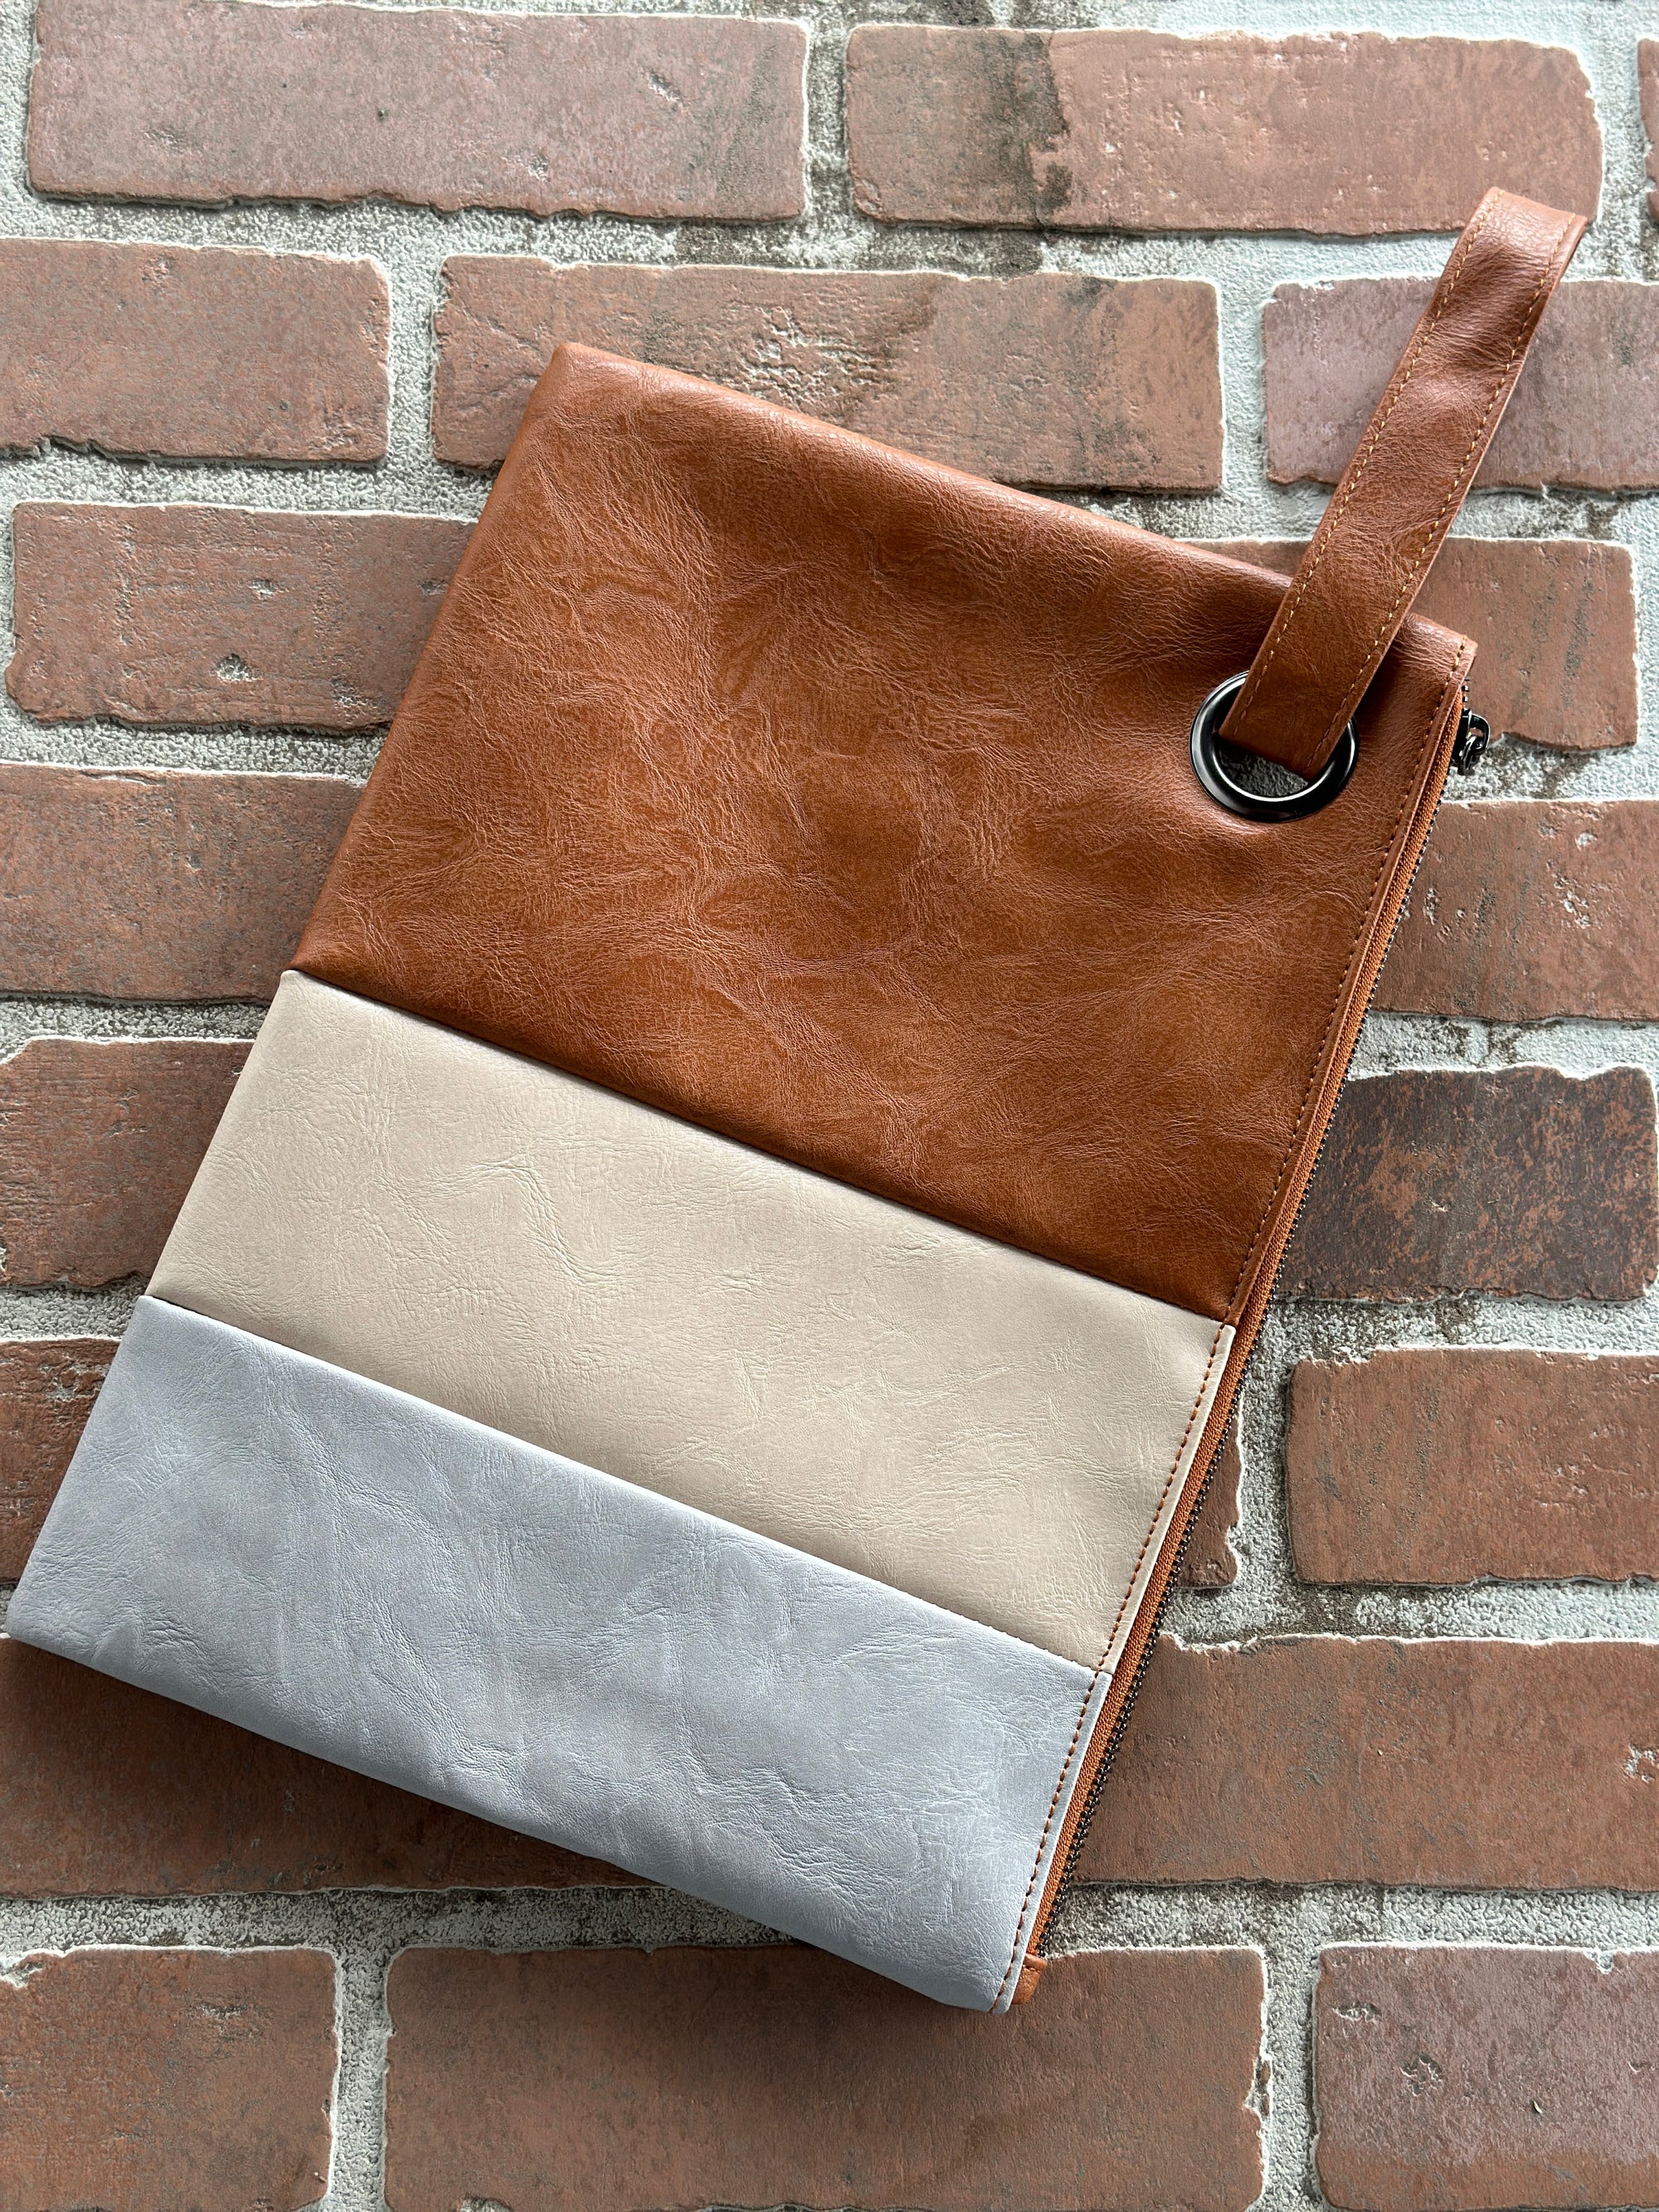 The Clementine Clutch - Camel/Tan/Grey